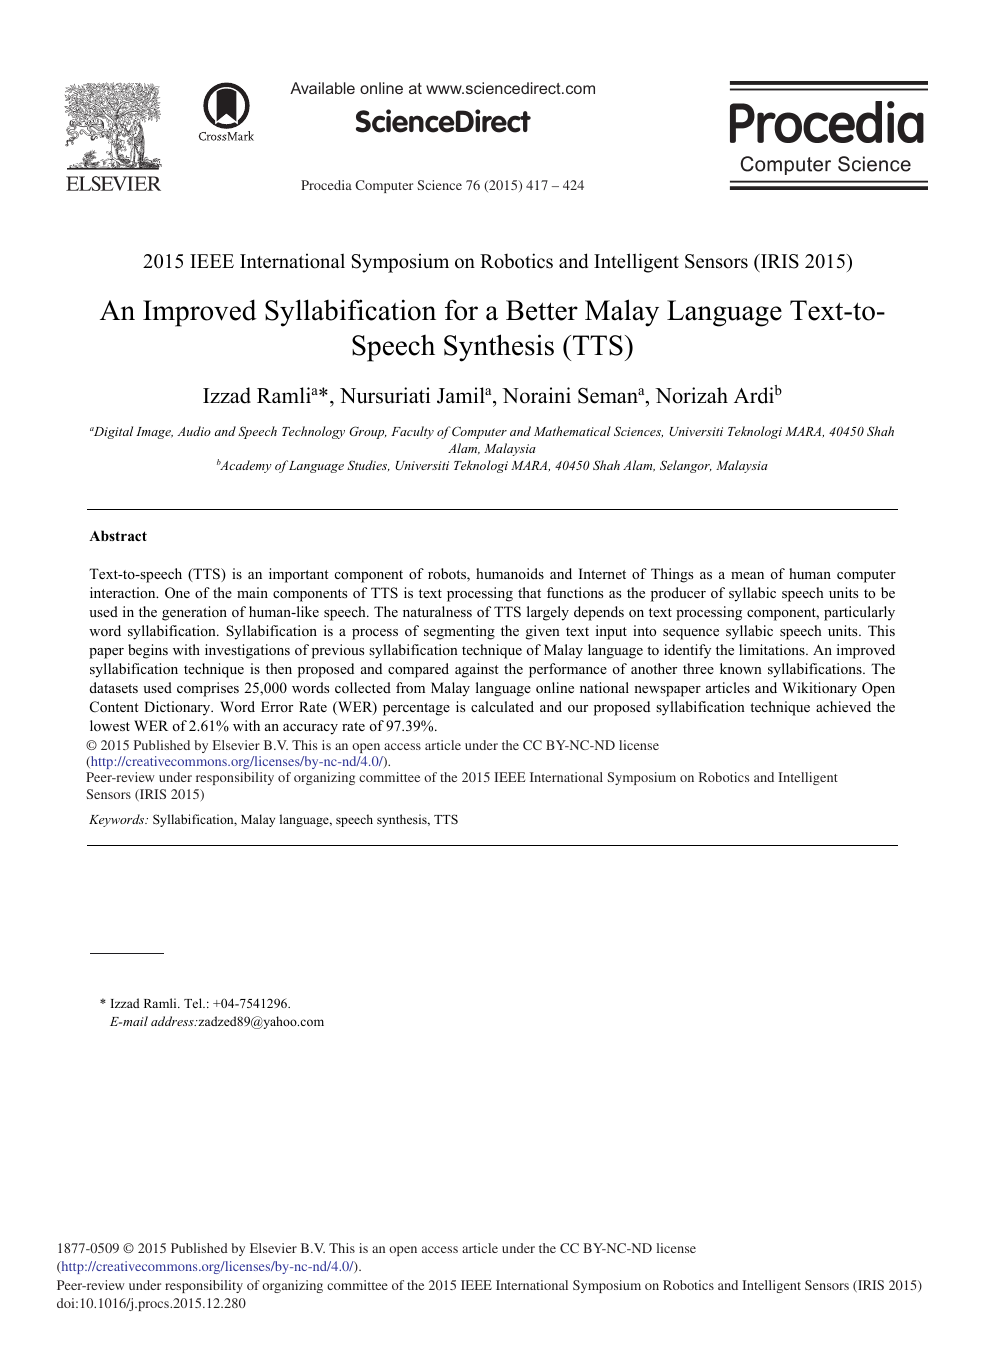 An Improved Syllabification For A Better Malay Language Text To Speech Synthesis Tts Topic Of Research Paper In Computer And Information Sciences Download Scholarly Article Pdf And Read For Free On Cyberleninka Open